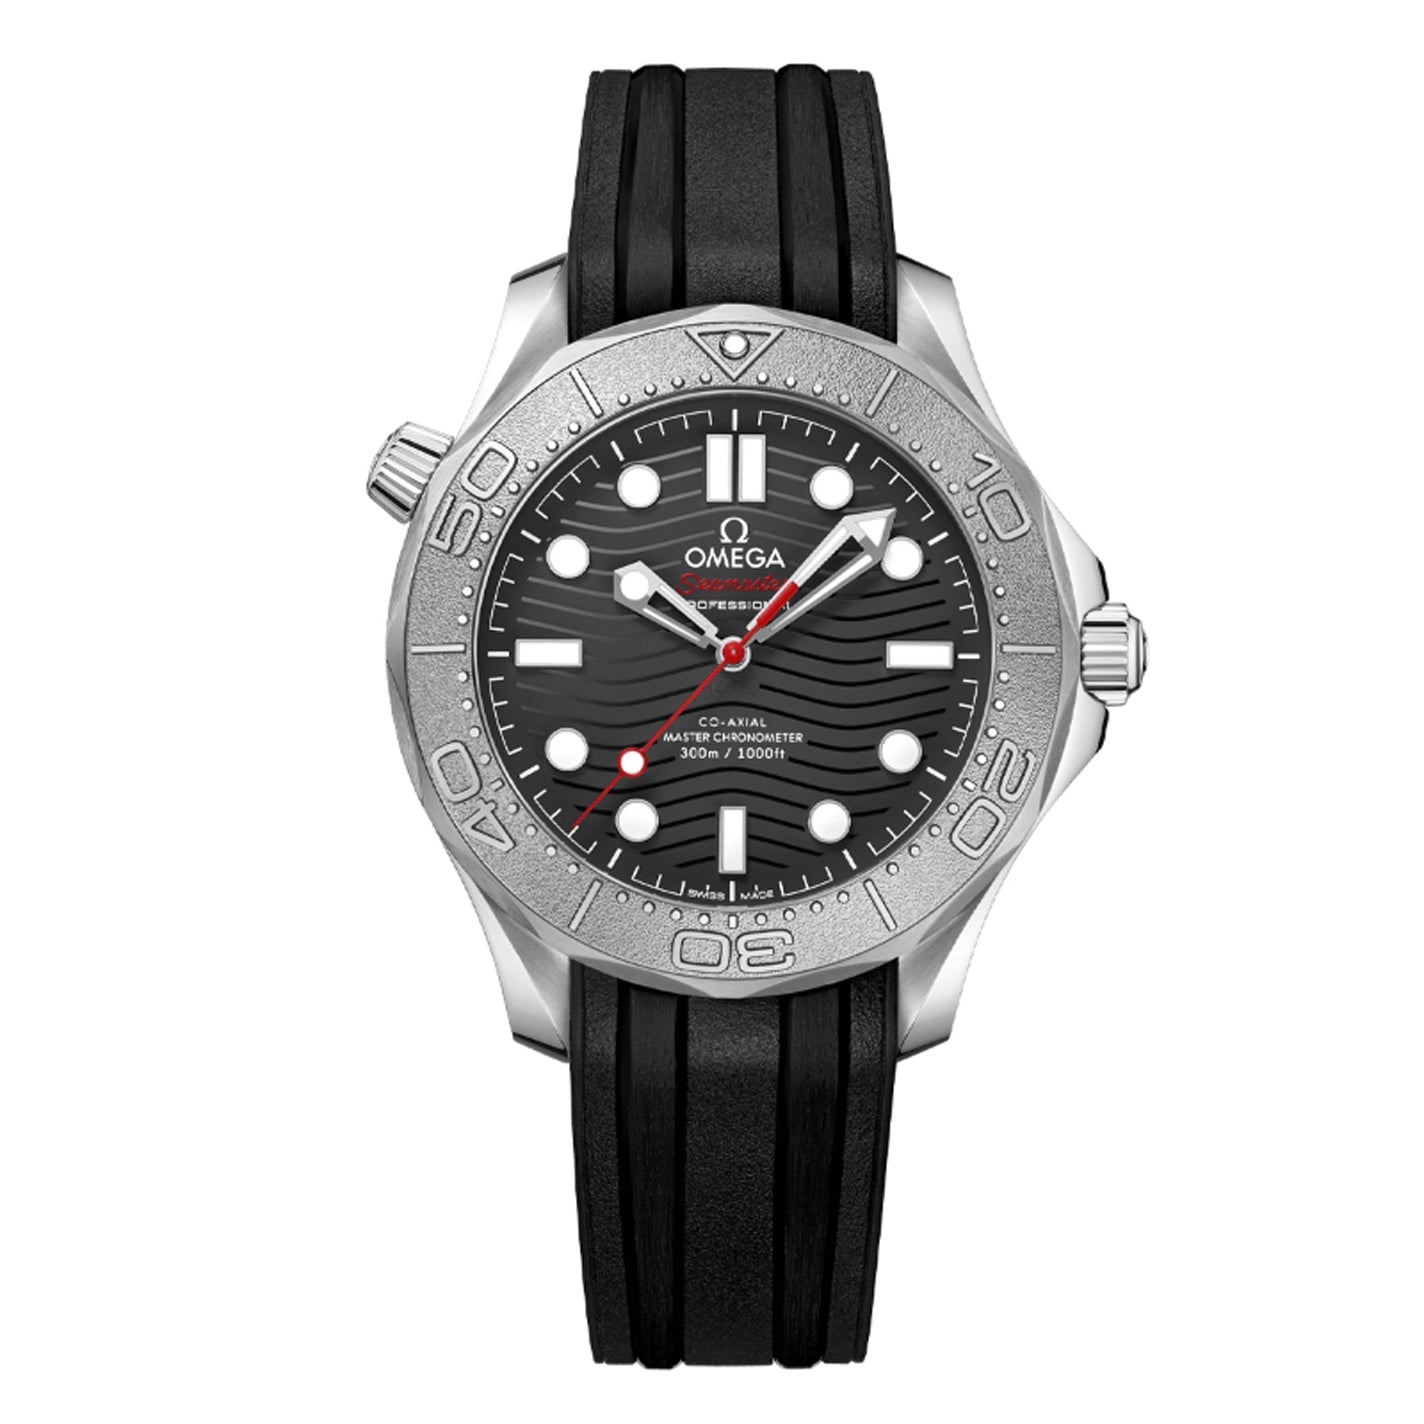 OMEGA Seamaster Diver 300M Co-Axial Master Chronometer 42mm Watch Nekton Edition